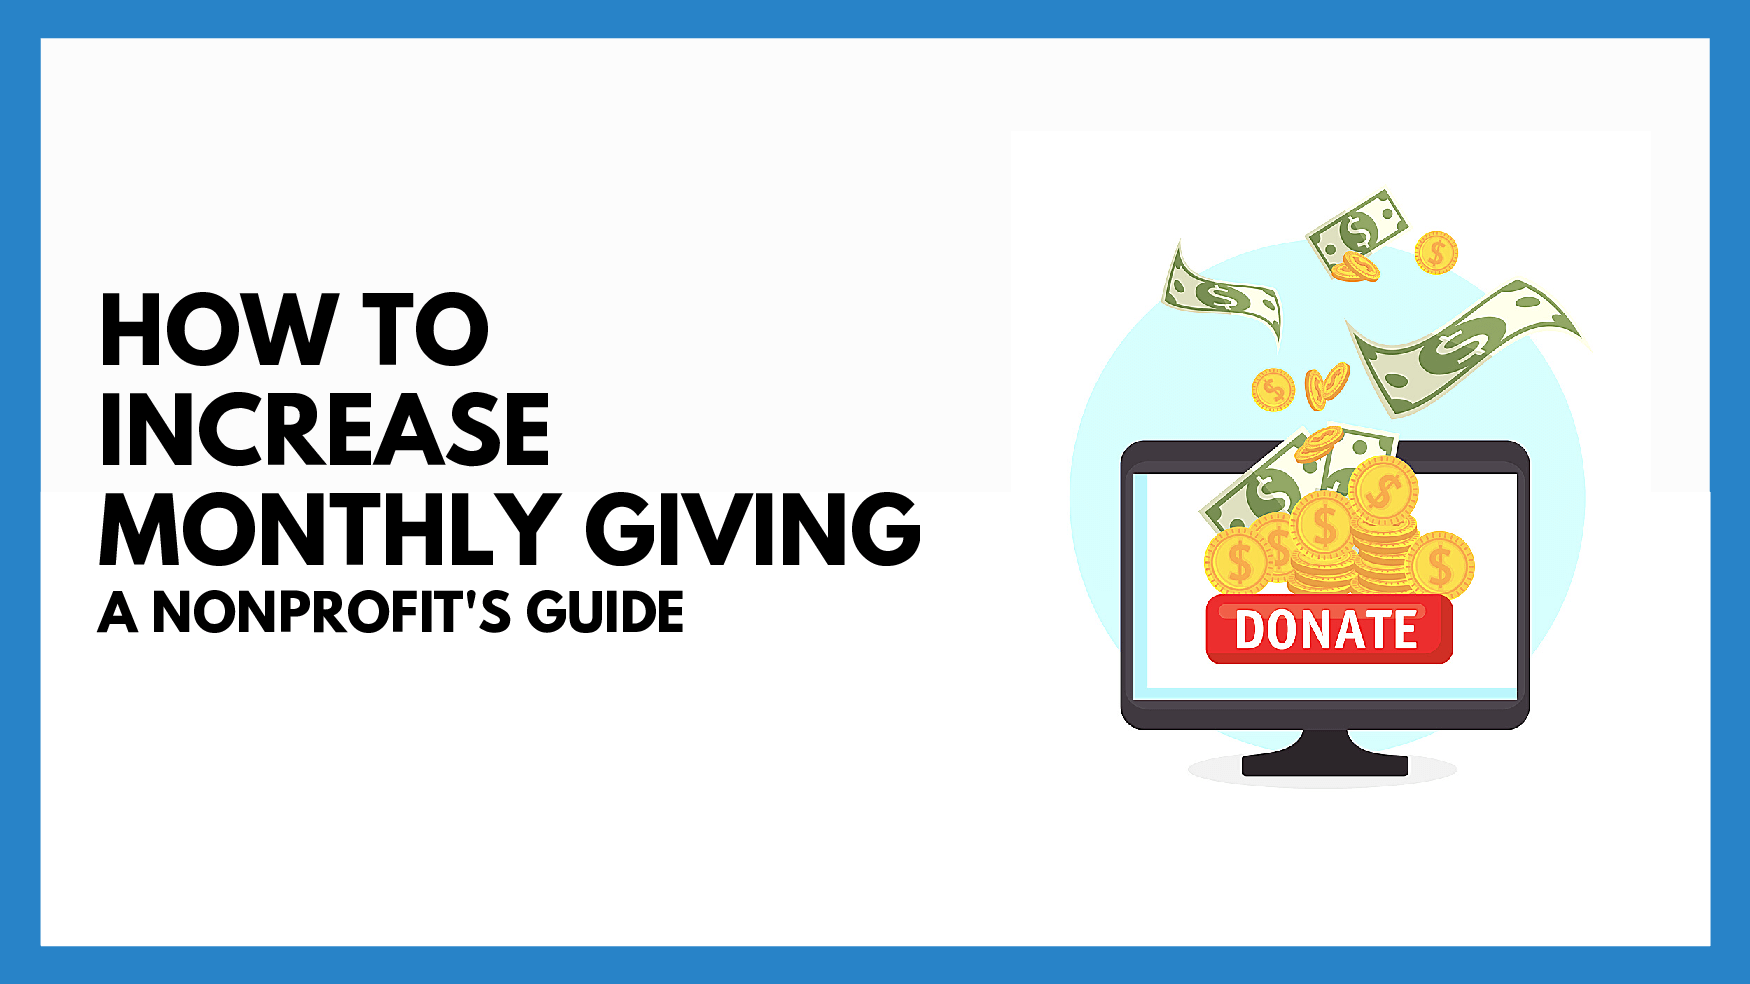 5 Actionable Tips on How to Increase Monthly Giving